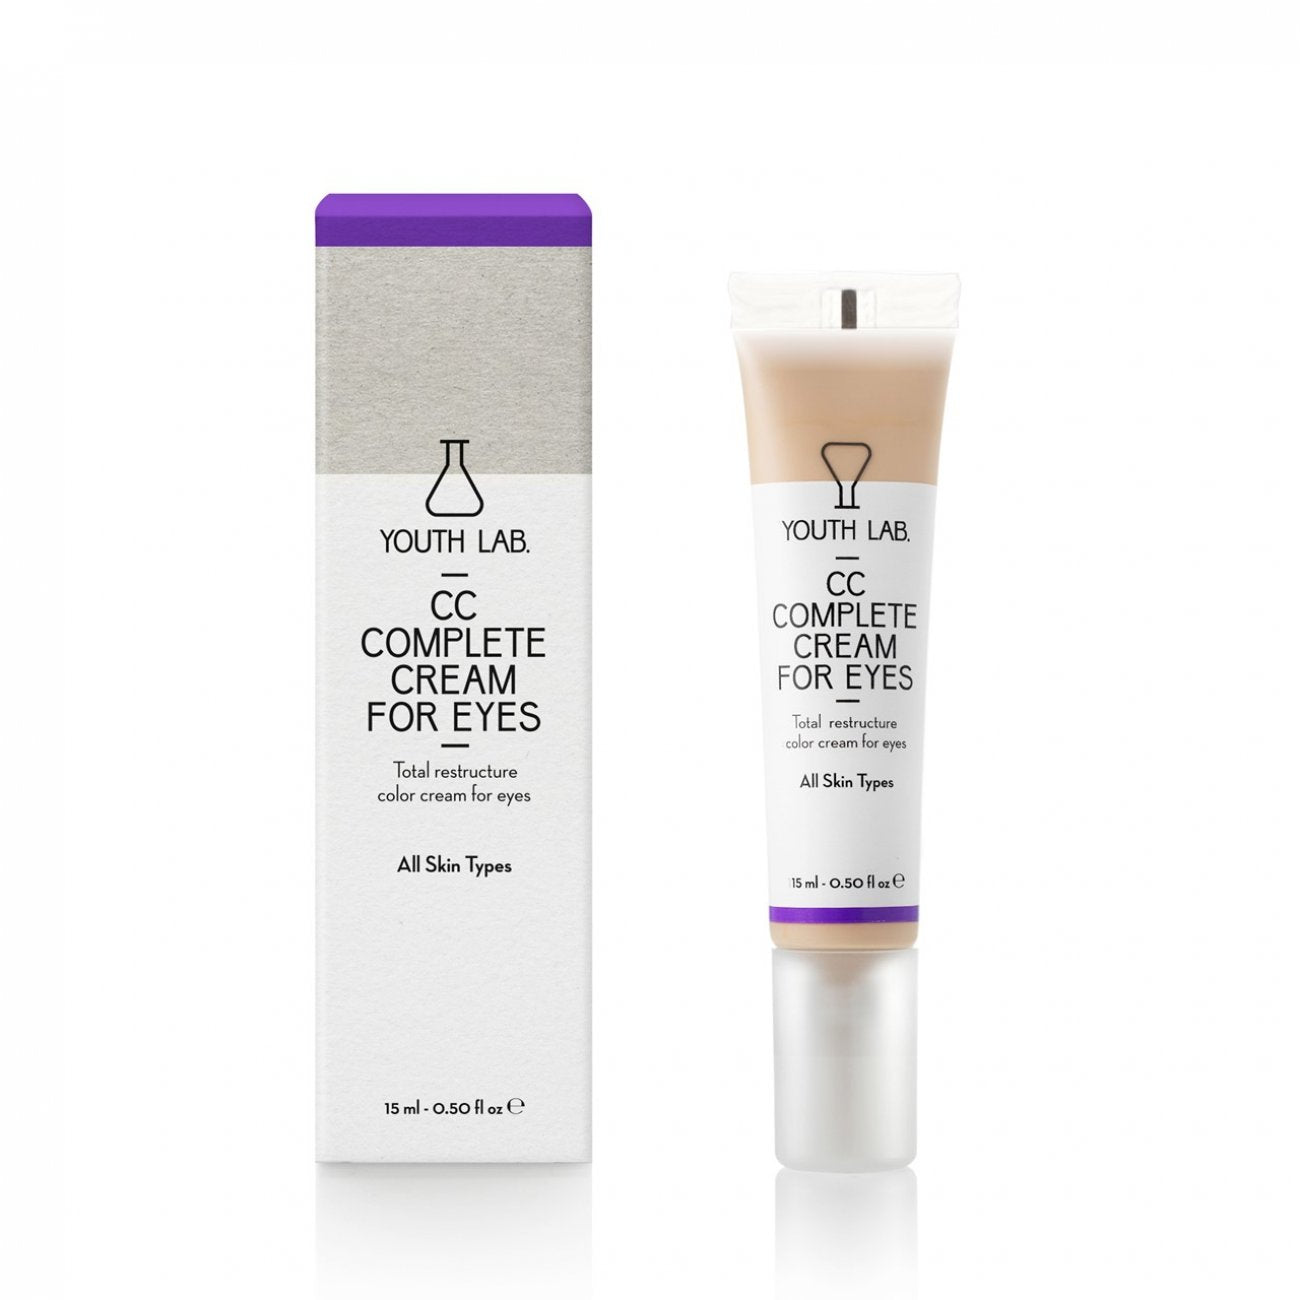 YOUTH LAB CC Complete Cream for Eyes 15ml